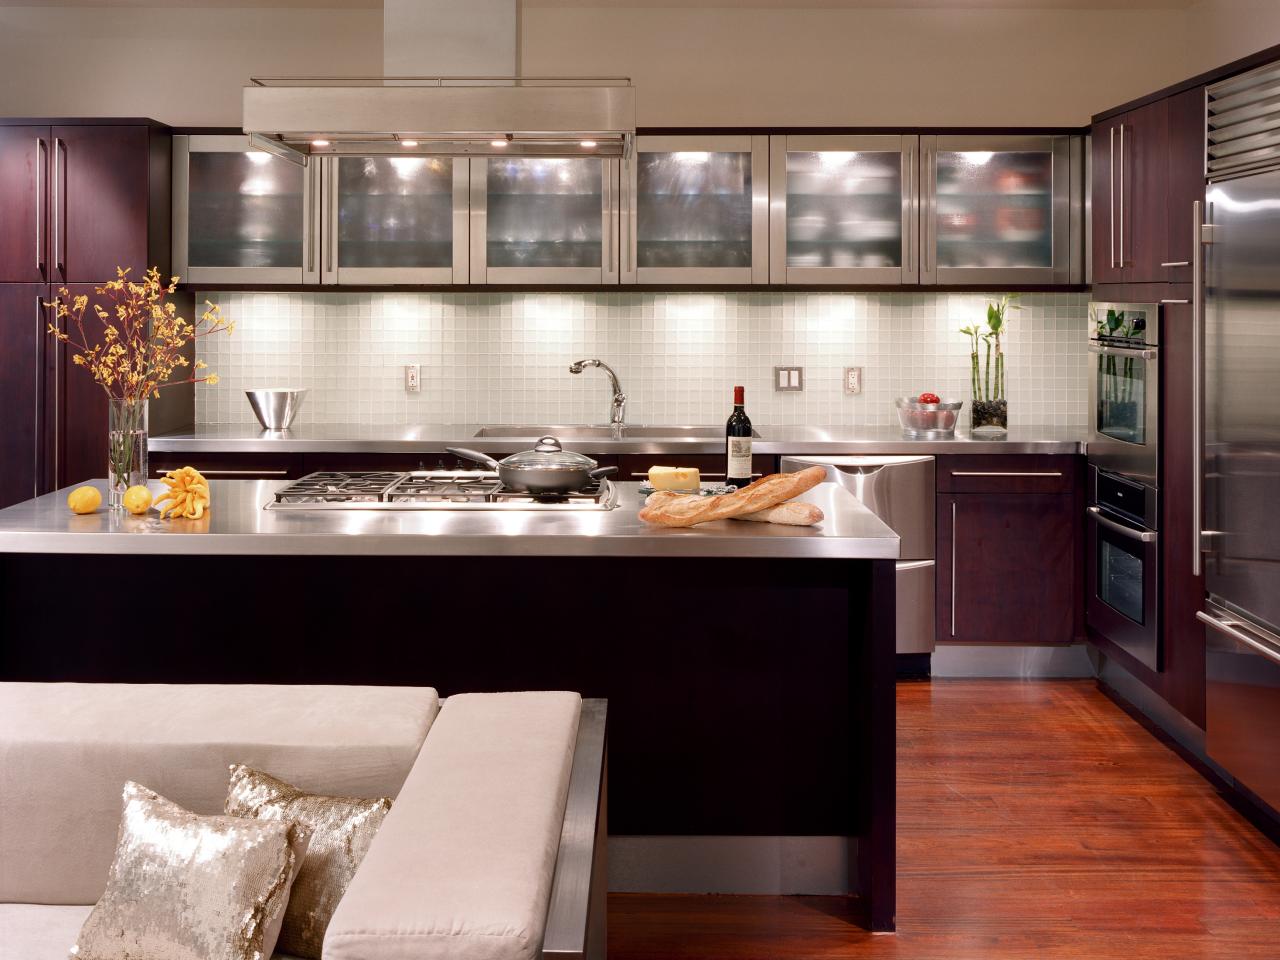 Using Space Wisely: Secrets From Professional Chefs | DIY